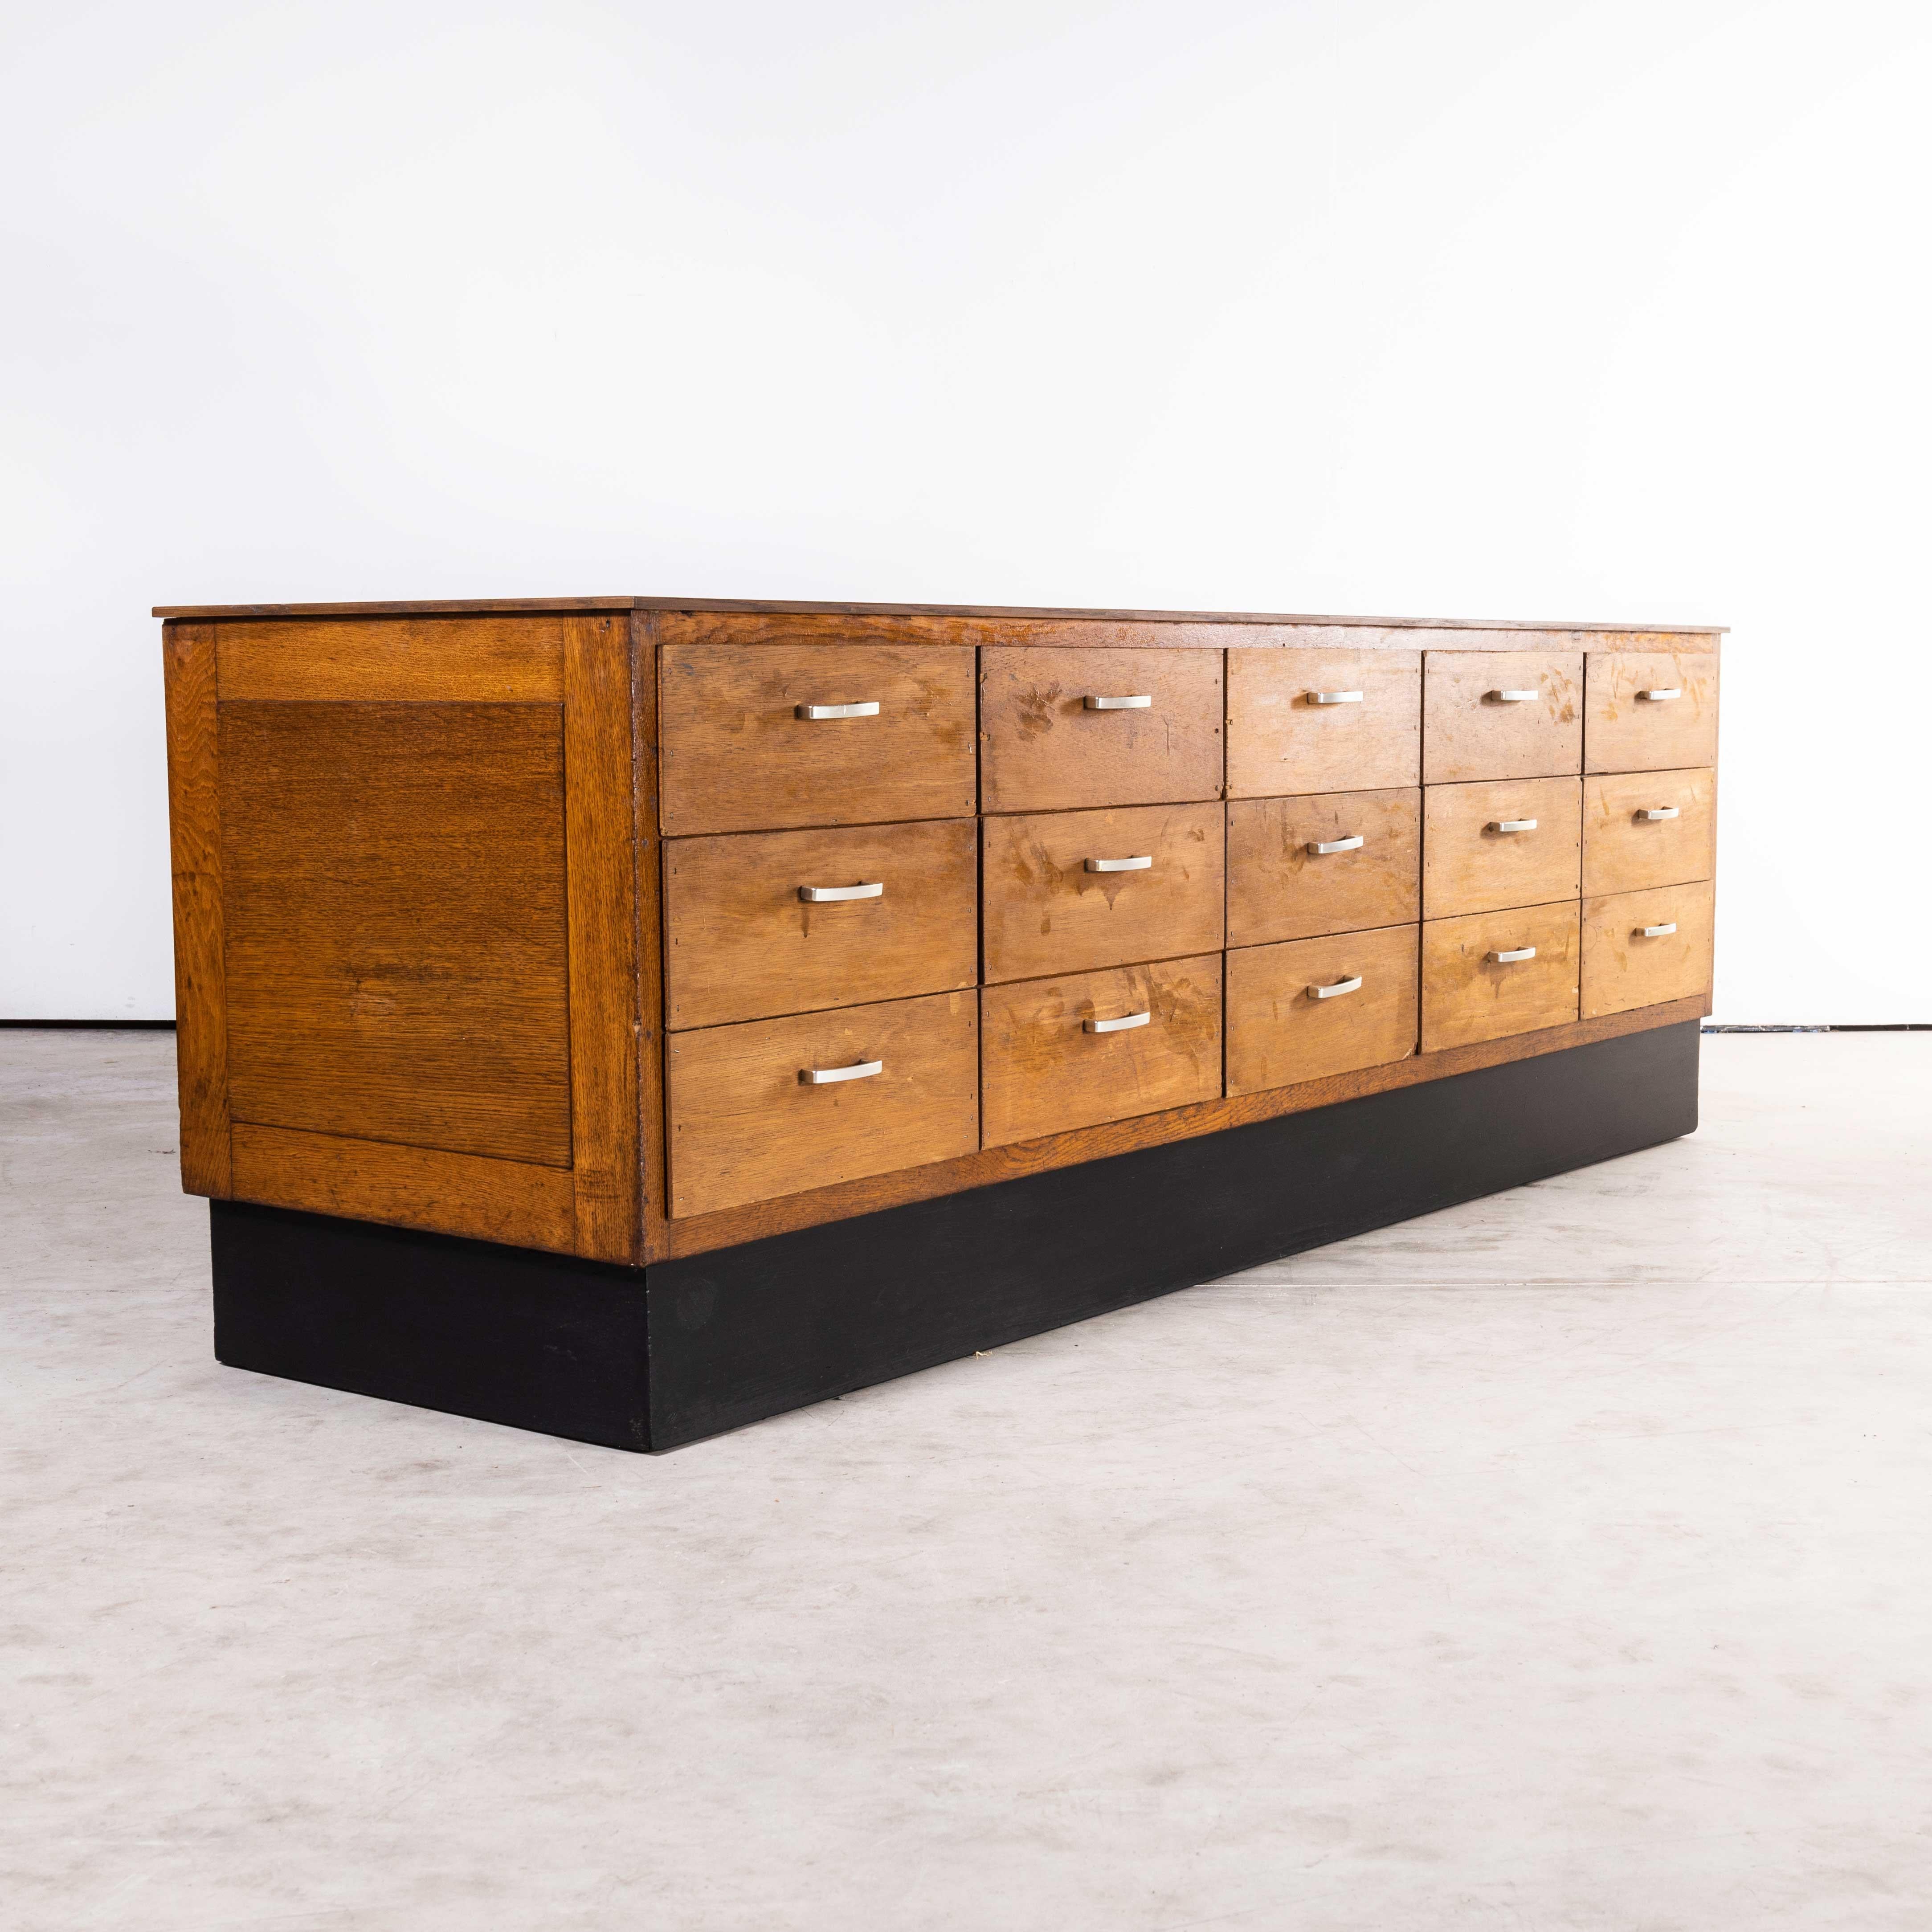 1950’s Belgian laboratory chest – bank of drawers – fifteen drawers
950’s Belgian laboratory chest – bank of drawers – fifteen drawers. Sourced from a college in Belgium this is a very practical bank of drawers originally made for storage of